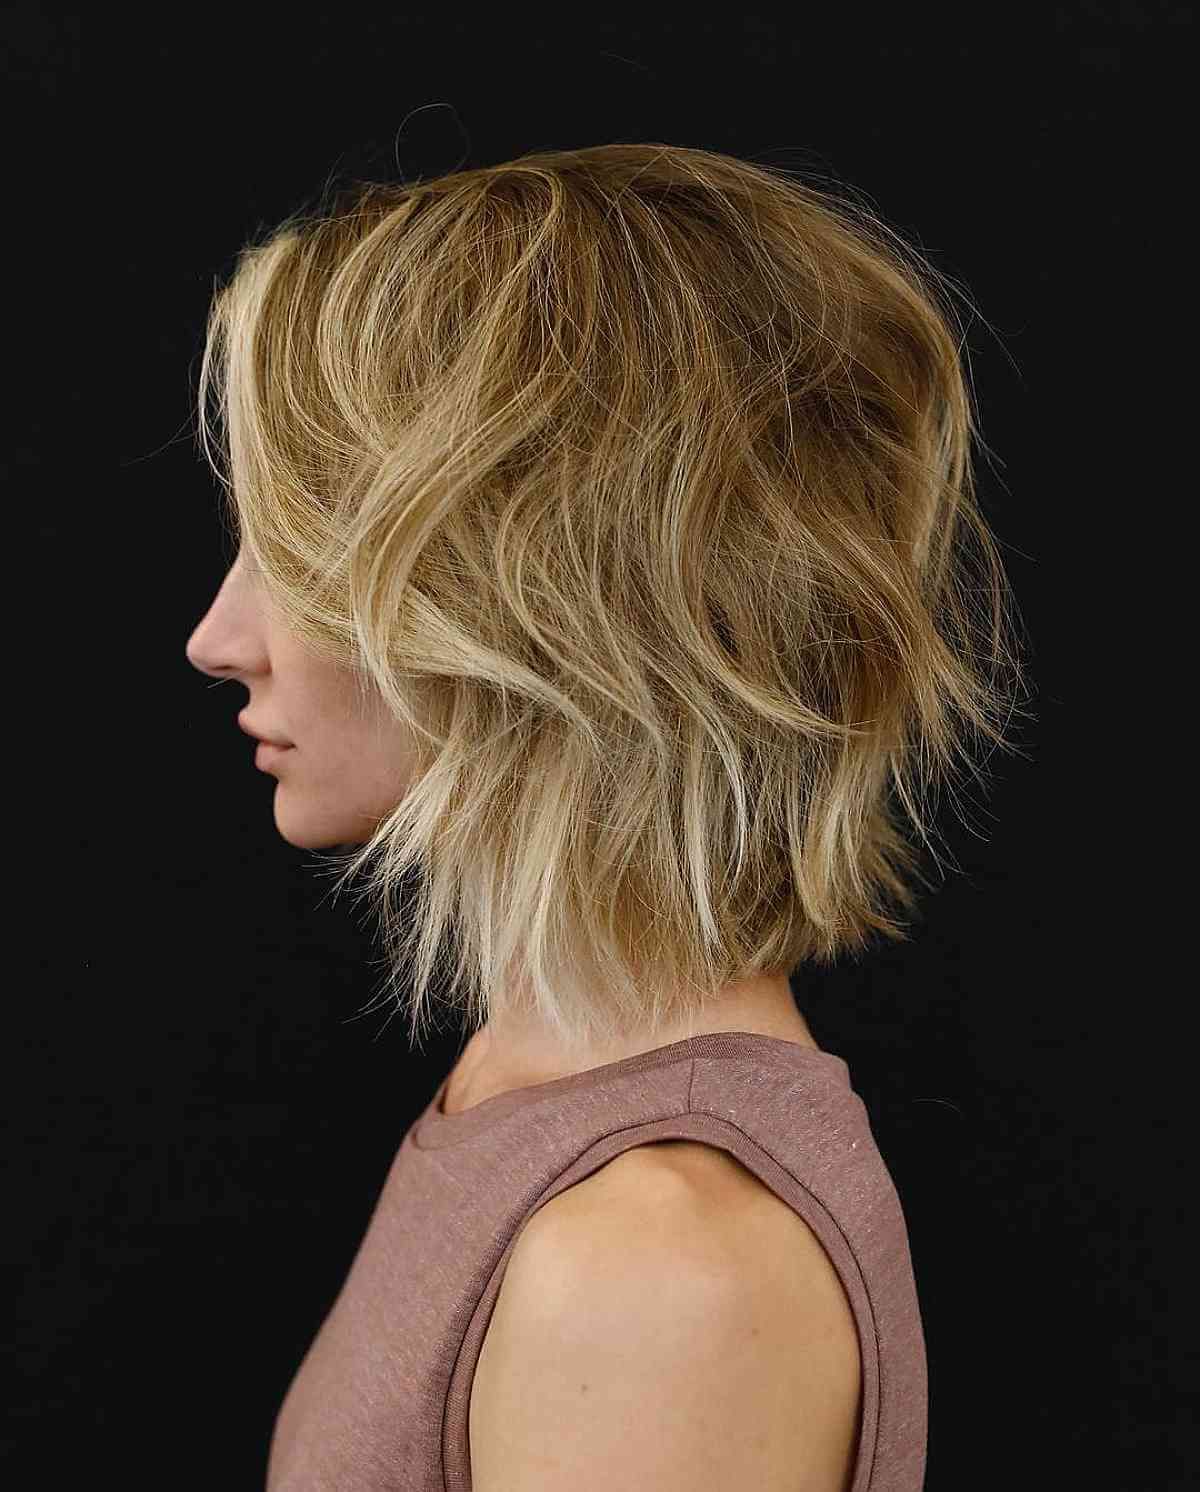 46 Messy Bob Haircut Ideas For The Ultimate Boho Vibe Intended For 2019 Bed Head Blunt Bob (View 10 of 20)